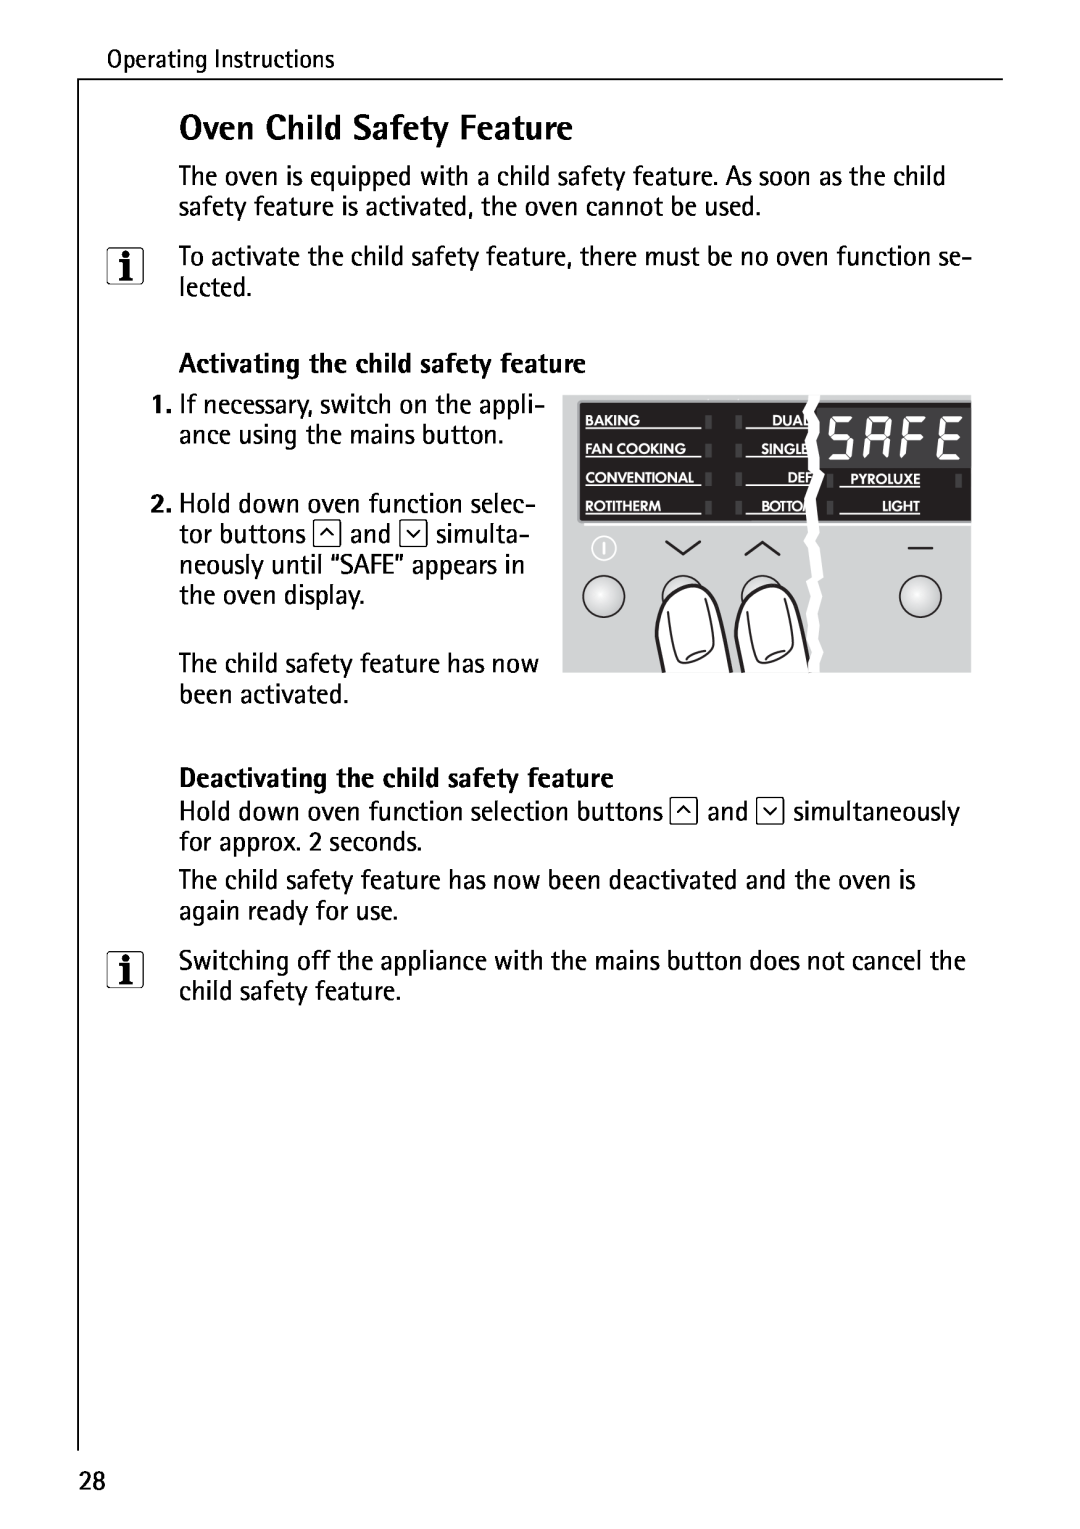 Electrolux B6140-1 Oven Child Safety Feature, Activating the child safety feature, Deactivating the child safety feature 